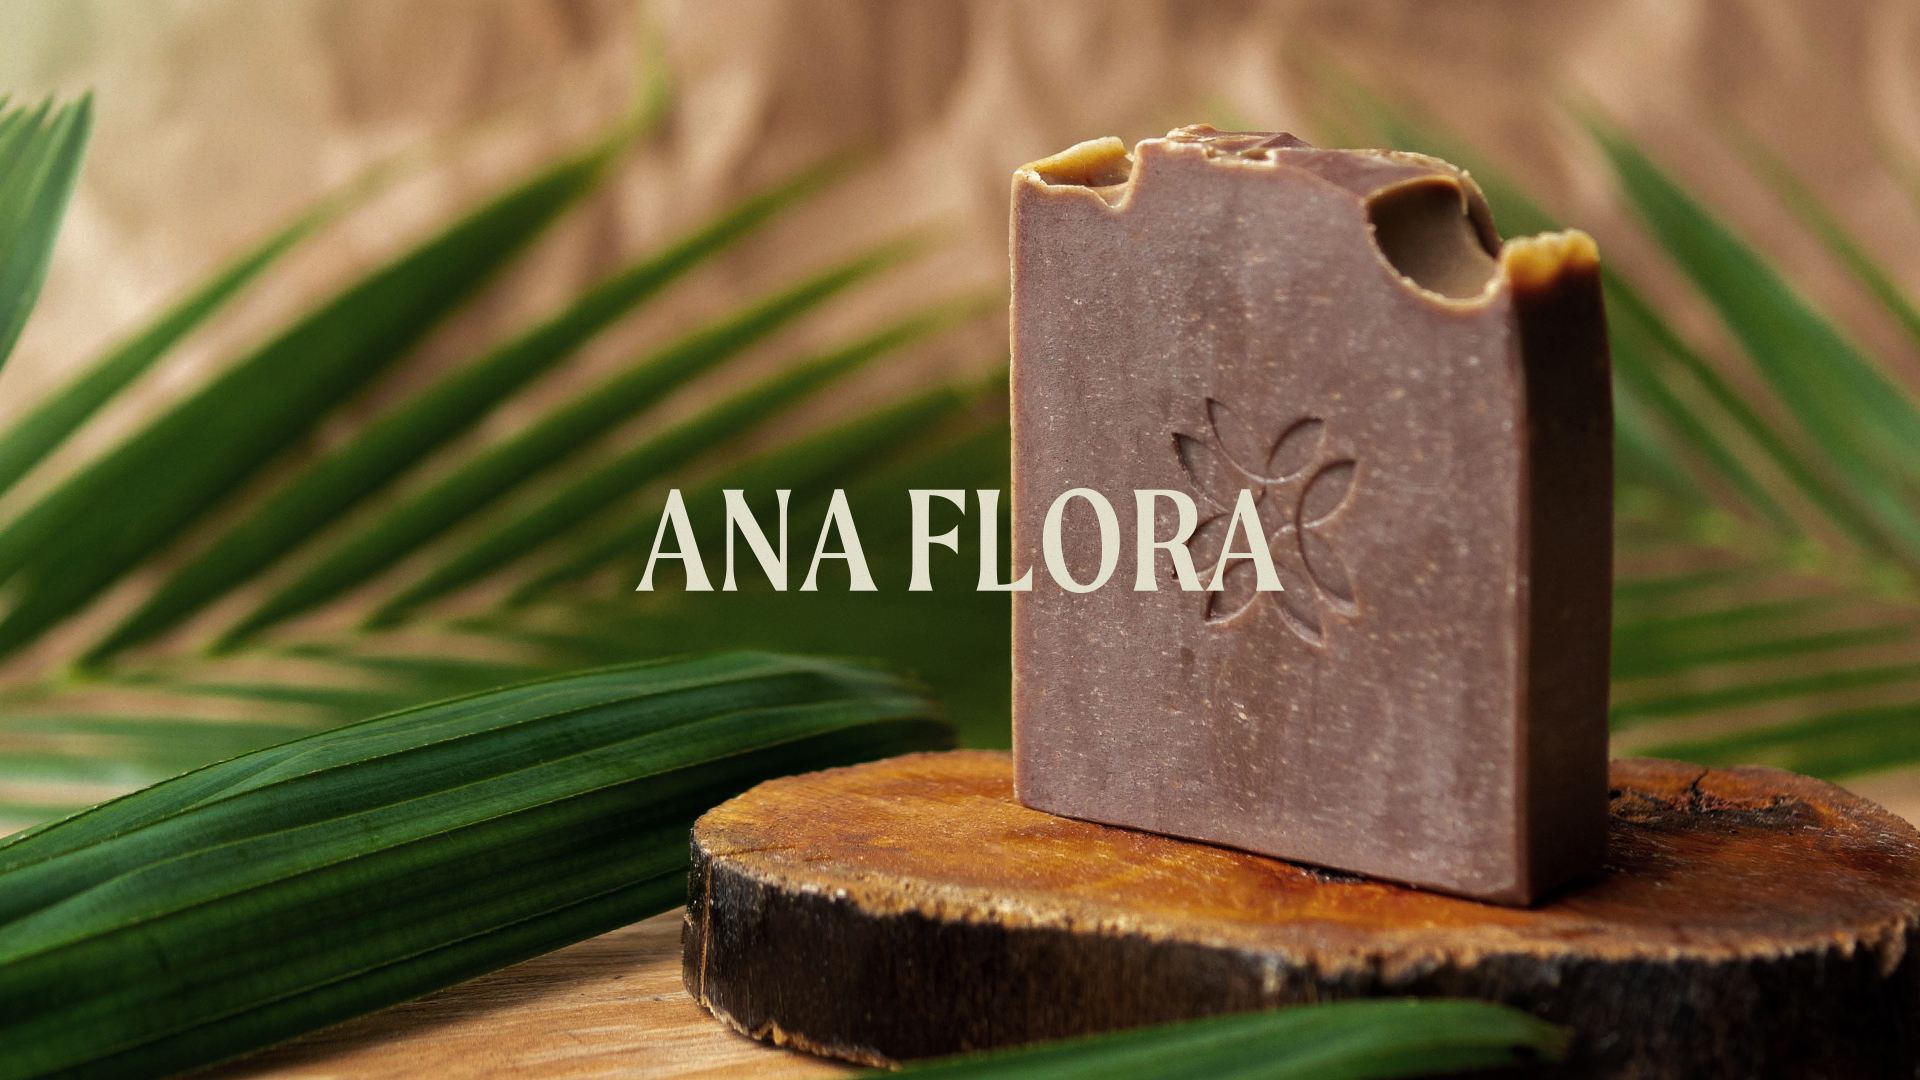 Rutka Studio Crafts a Modern and Natural Identity for Ana Flora’s Handmade Soap Company